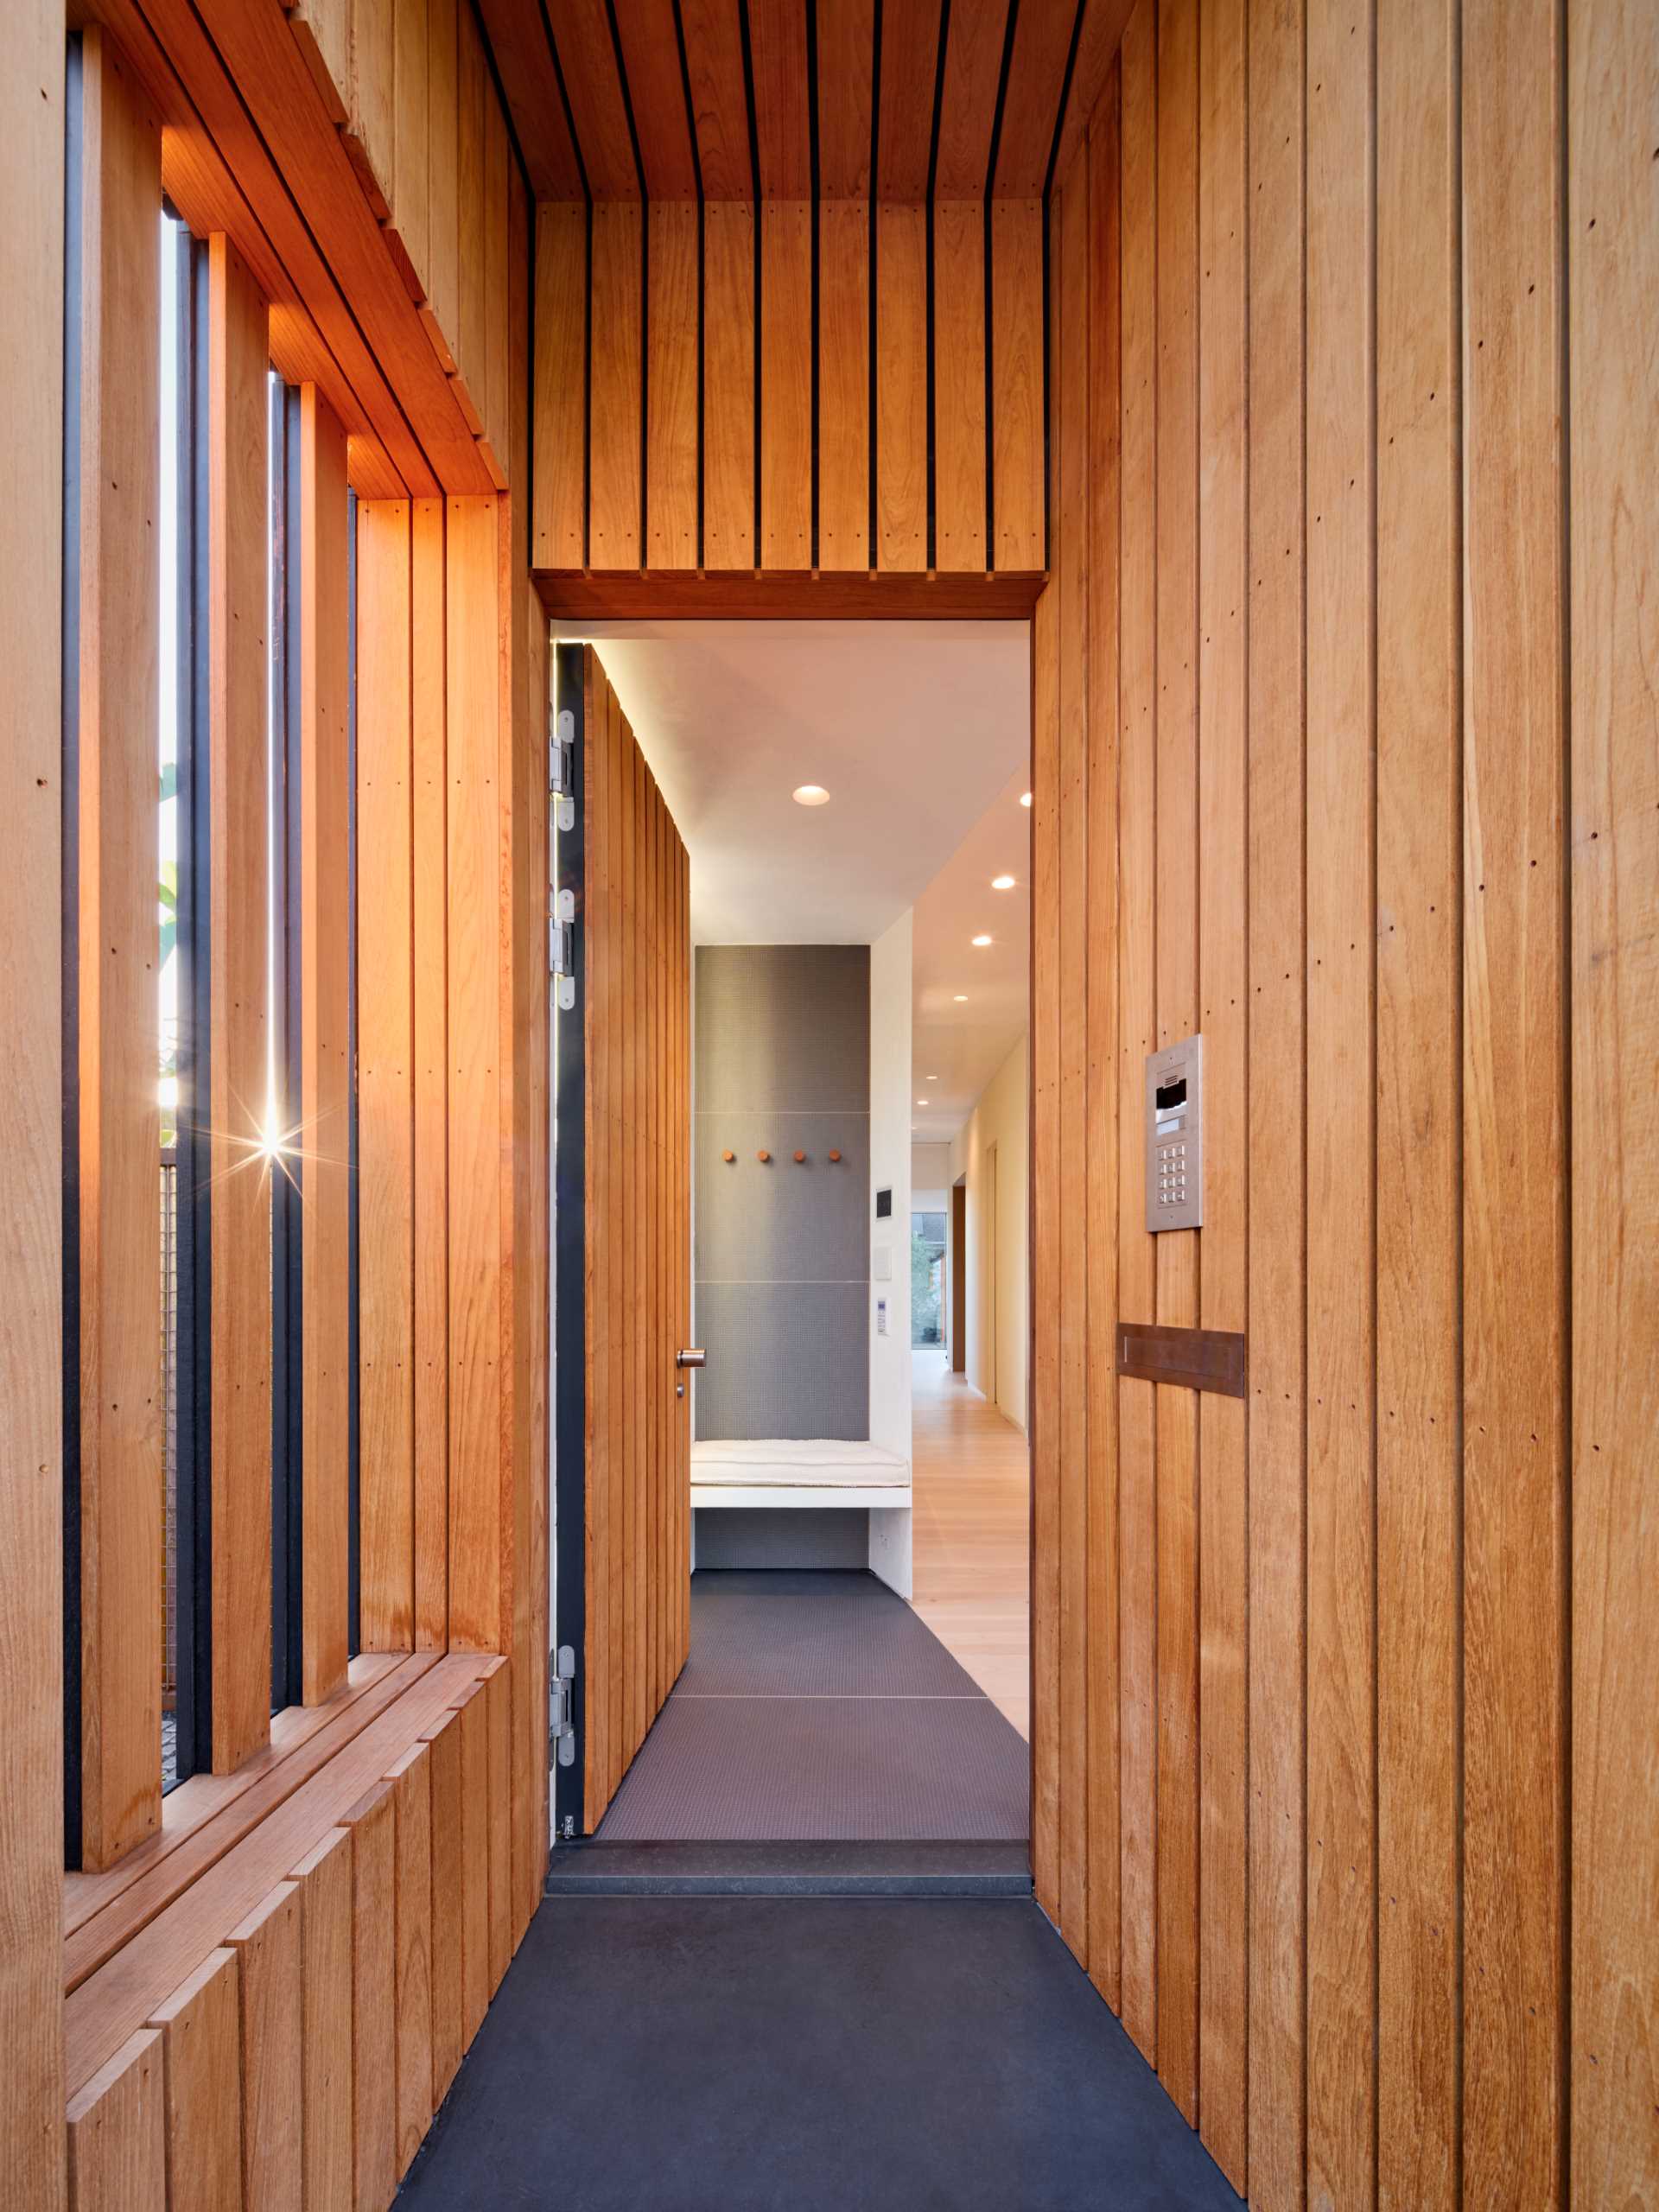 A modern house with a wood lined entry to match the front door.